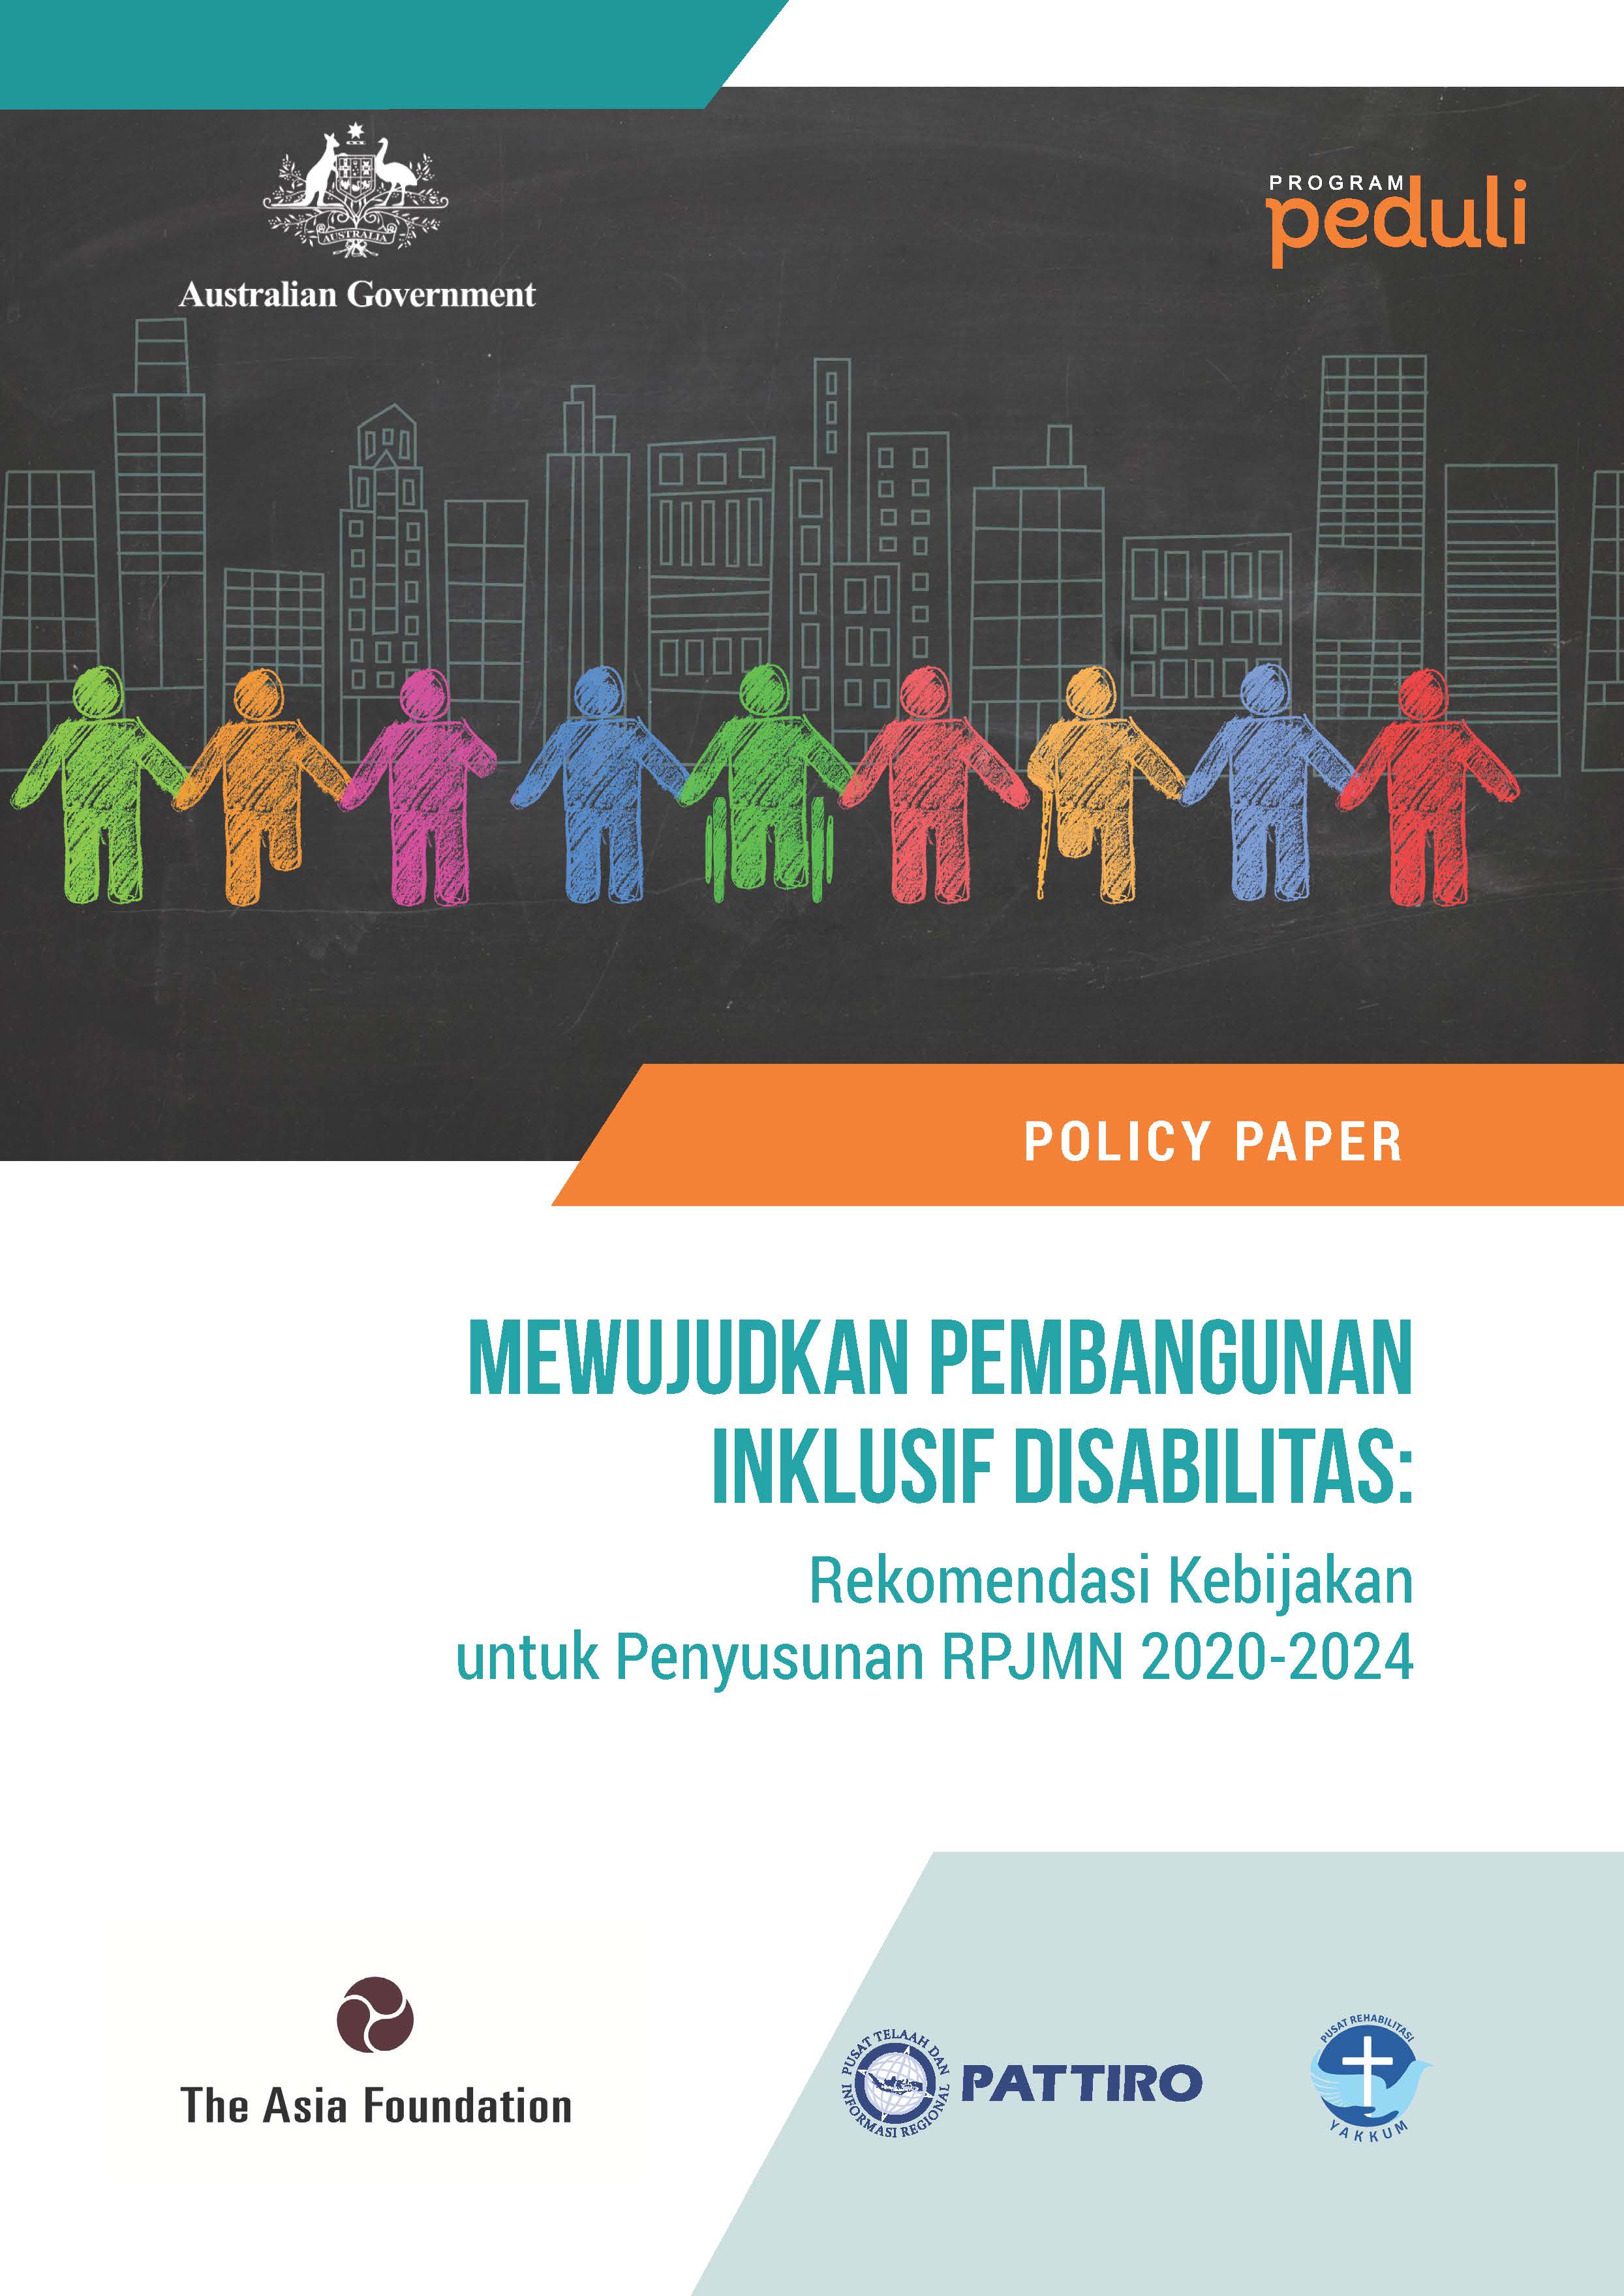 Policy Paper | Realizing Disability Inclusive Development: Policy Recommendations for RPJMN Preparation 2020-2024